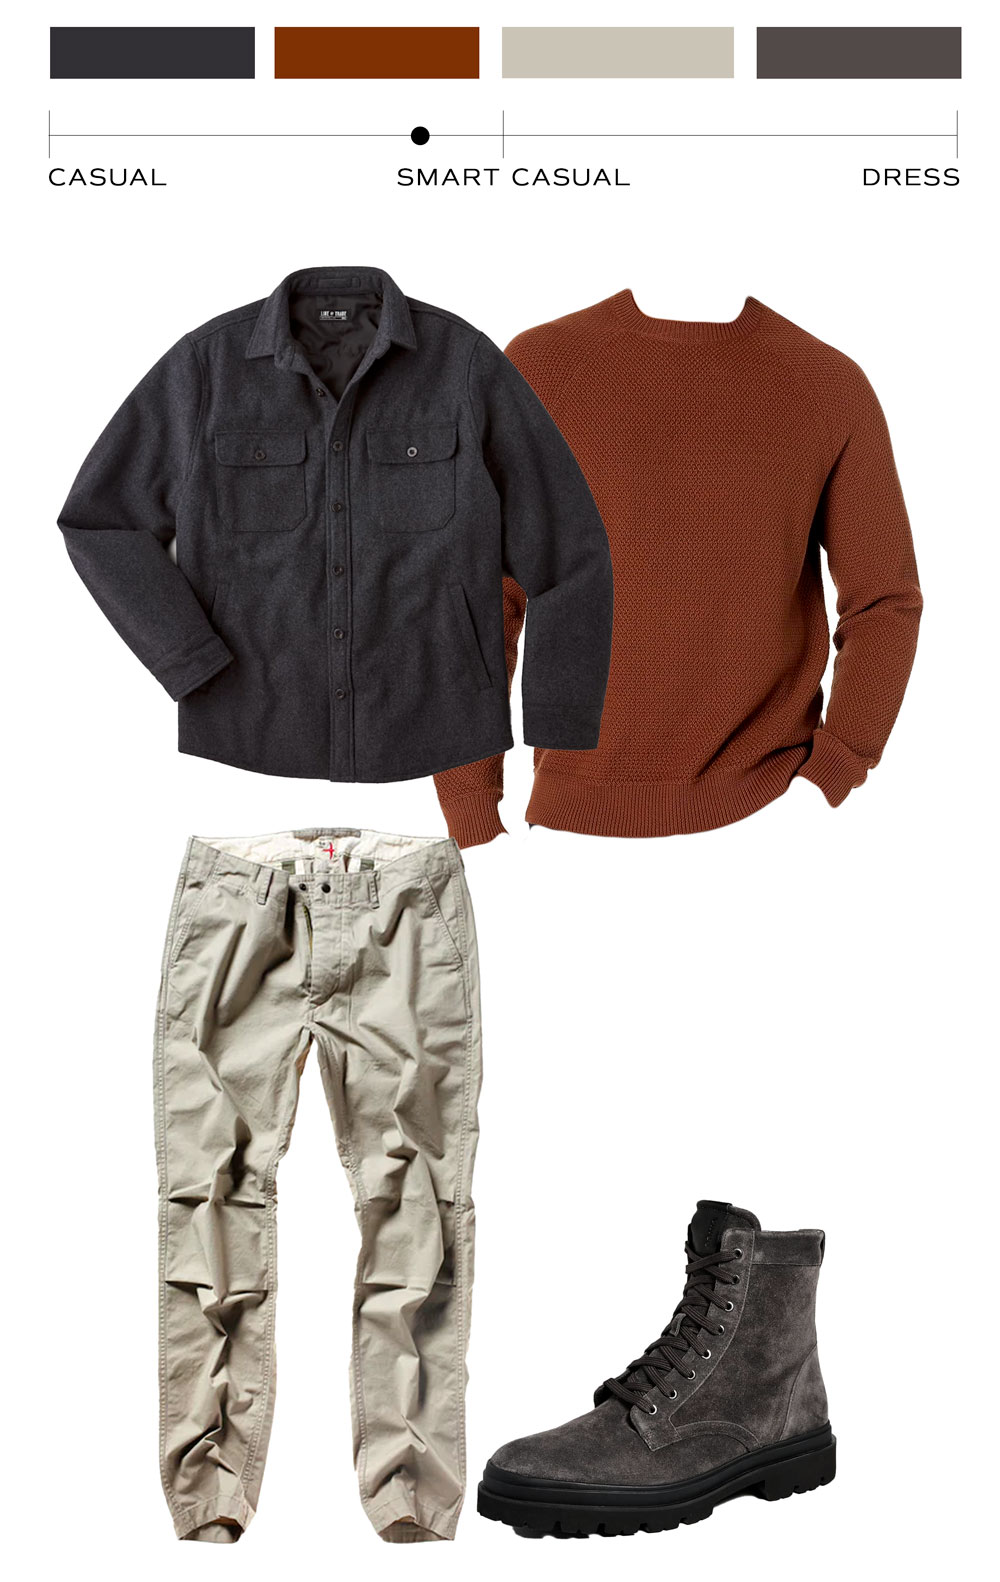 A layout of men's clothing and color palette for a smart casual dress code. At the top, three color swatches in dark grey, rust, and beige. Below, a dark grey button-up shirt, next to a rust-colored crew neck sweater. Underneath, light beige pants are displayed, and to the right, a pair of dark grey lace-up boots with a thick sole. The clothing items are arranged separately against a white background.